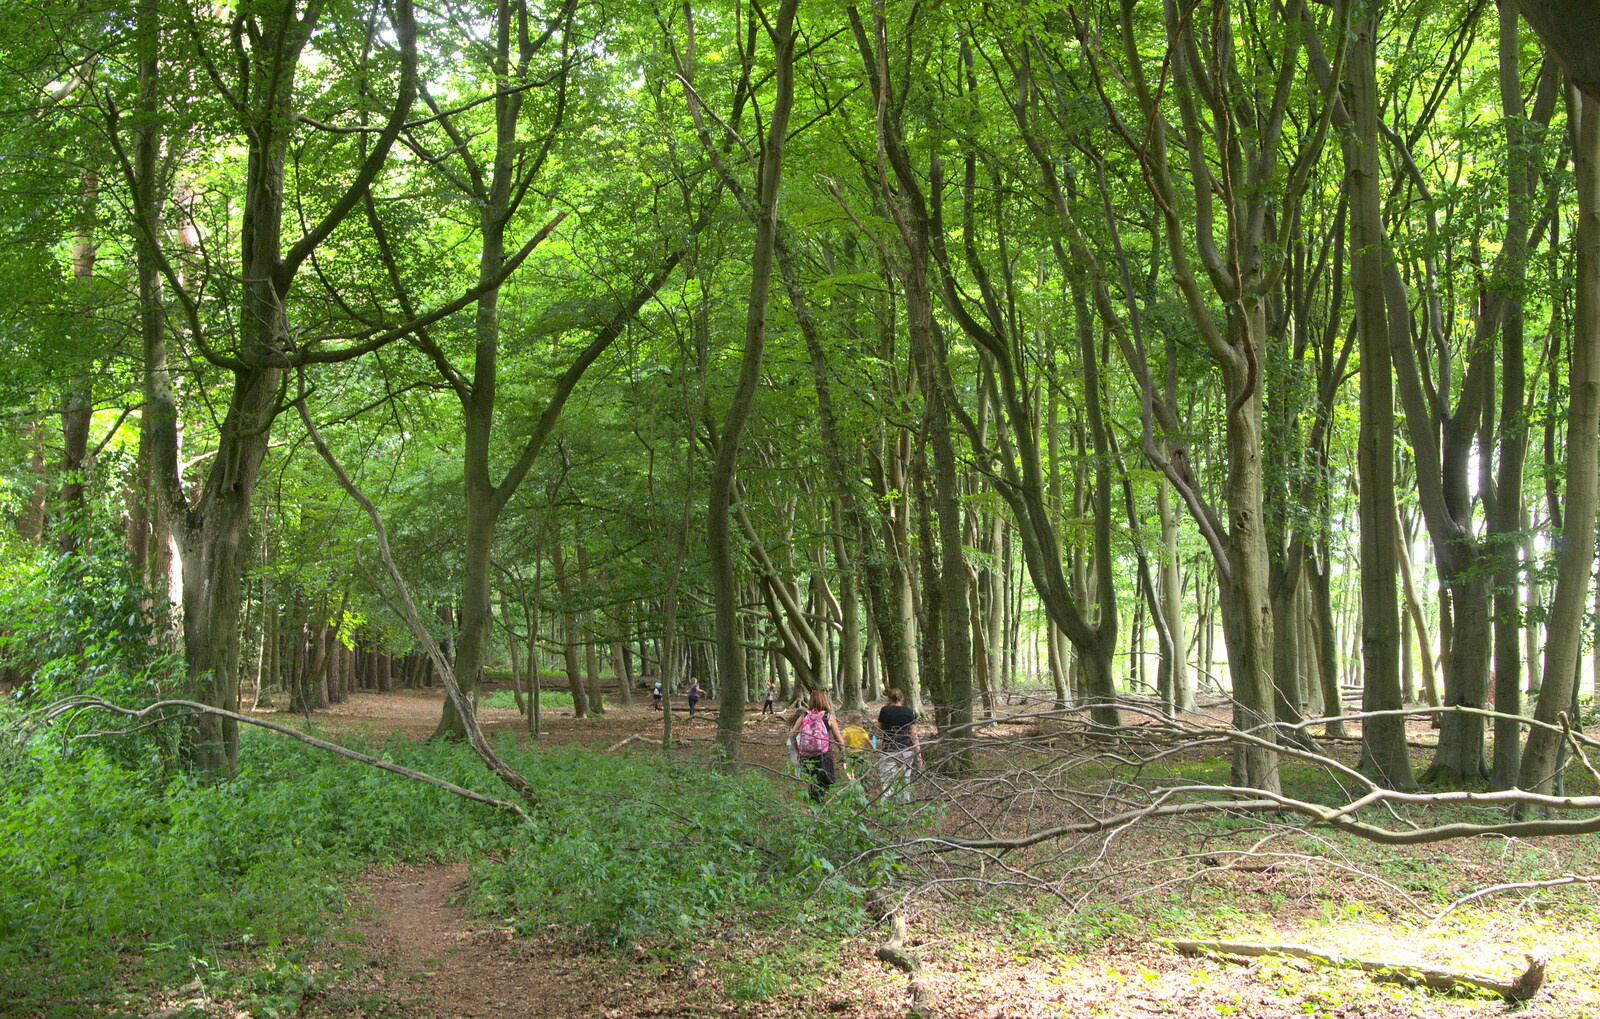 A walk in the woods from Camping at Dower House, West Harling, Norfolk - 1st July 2017